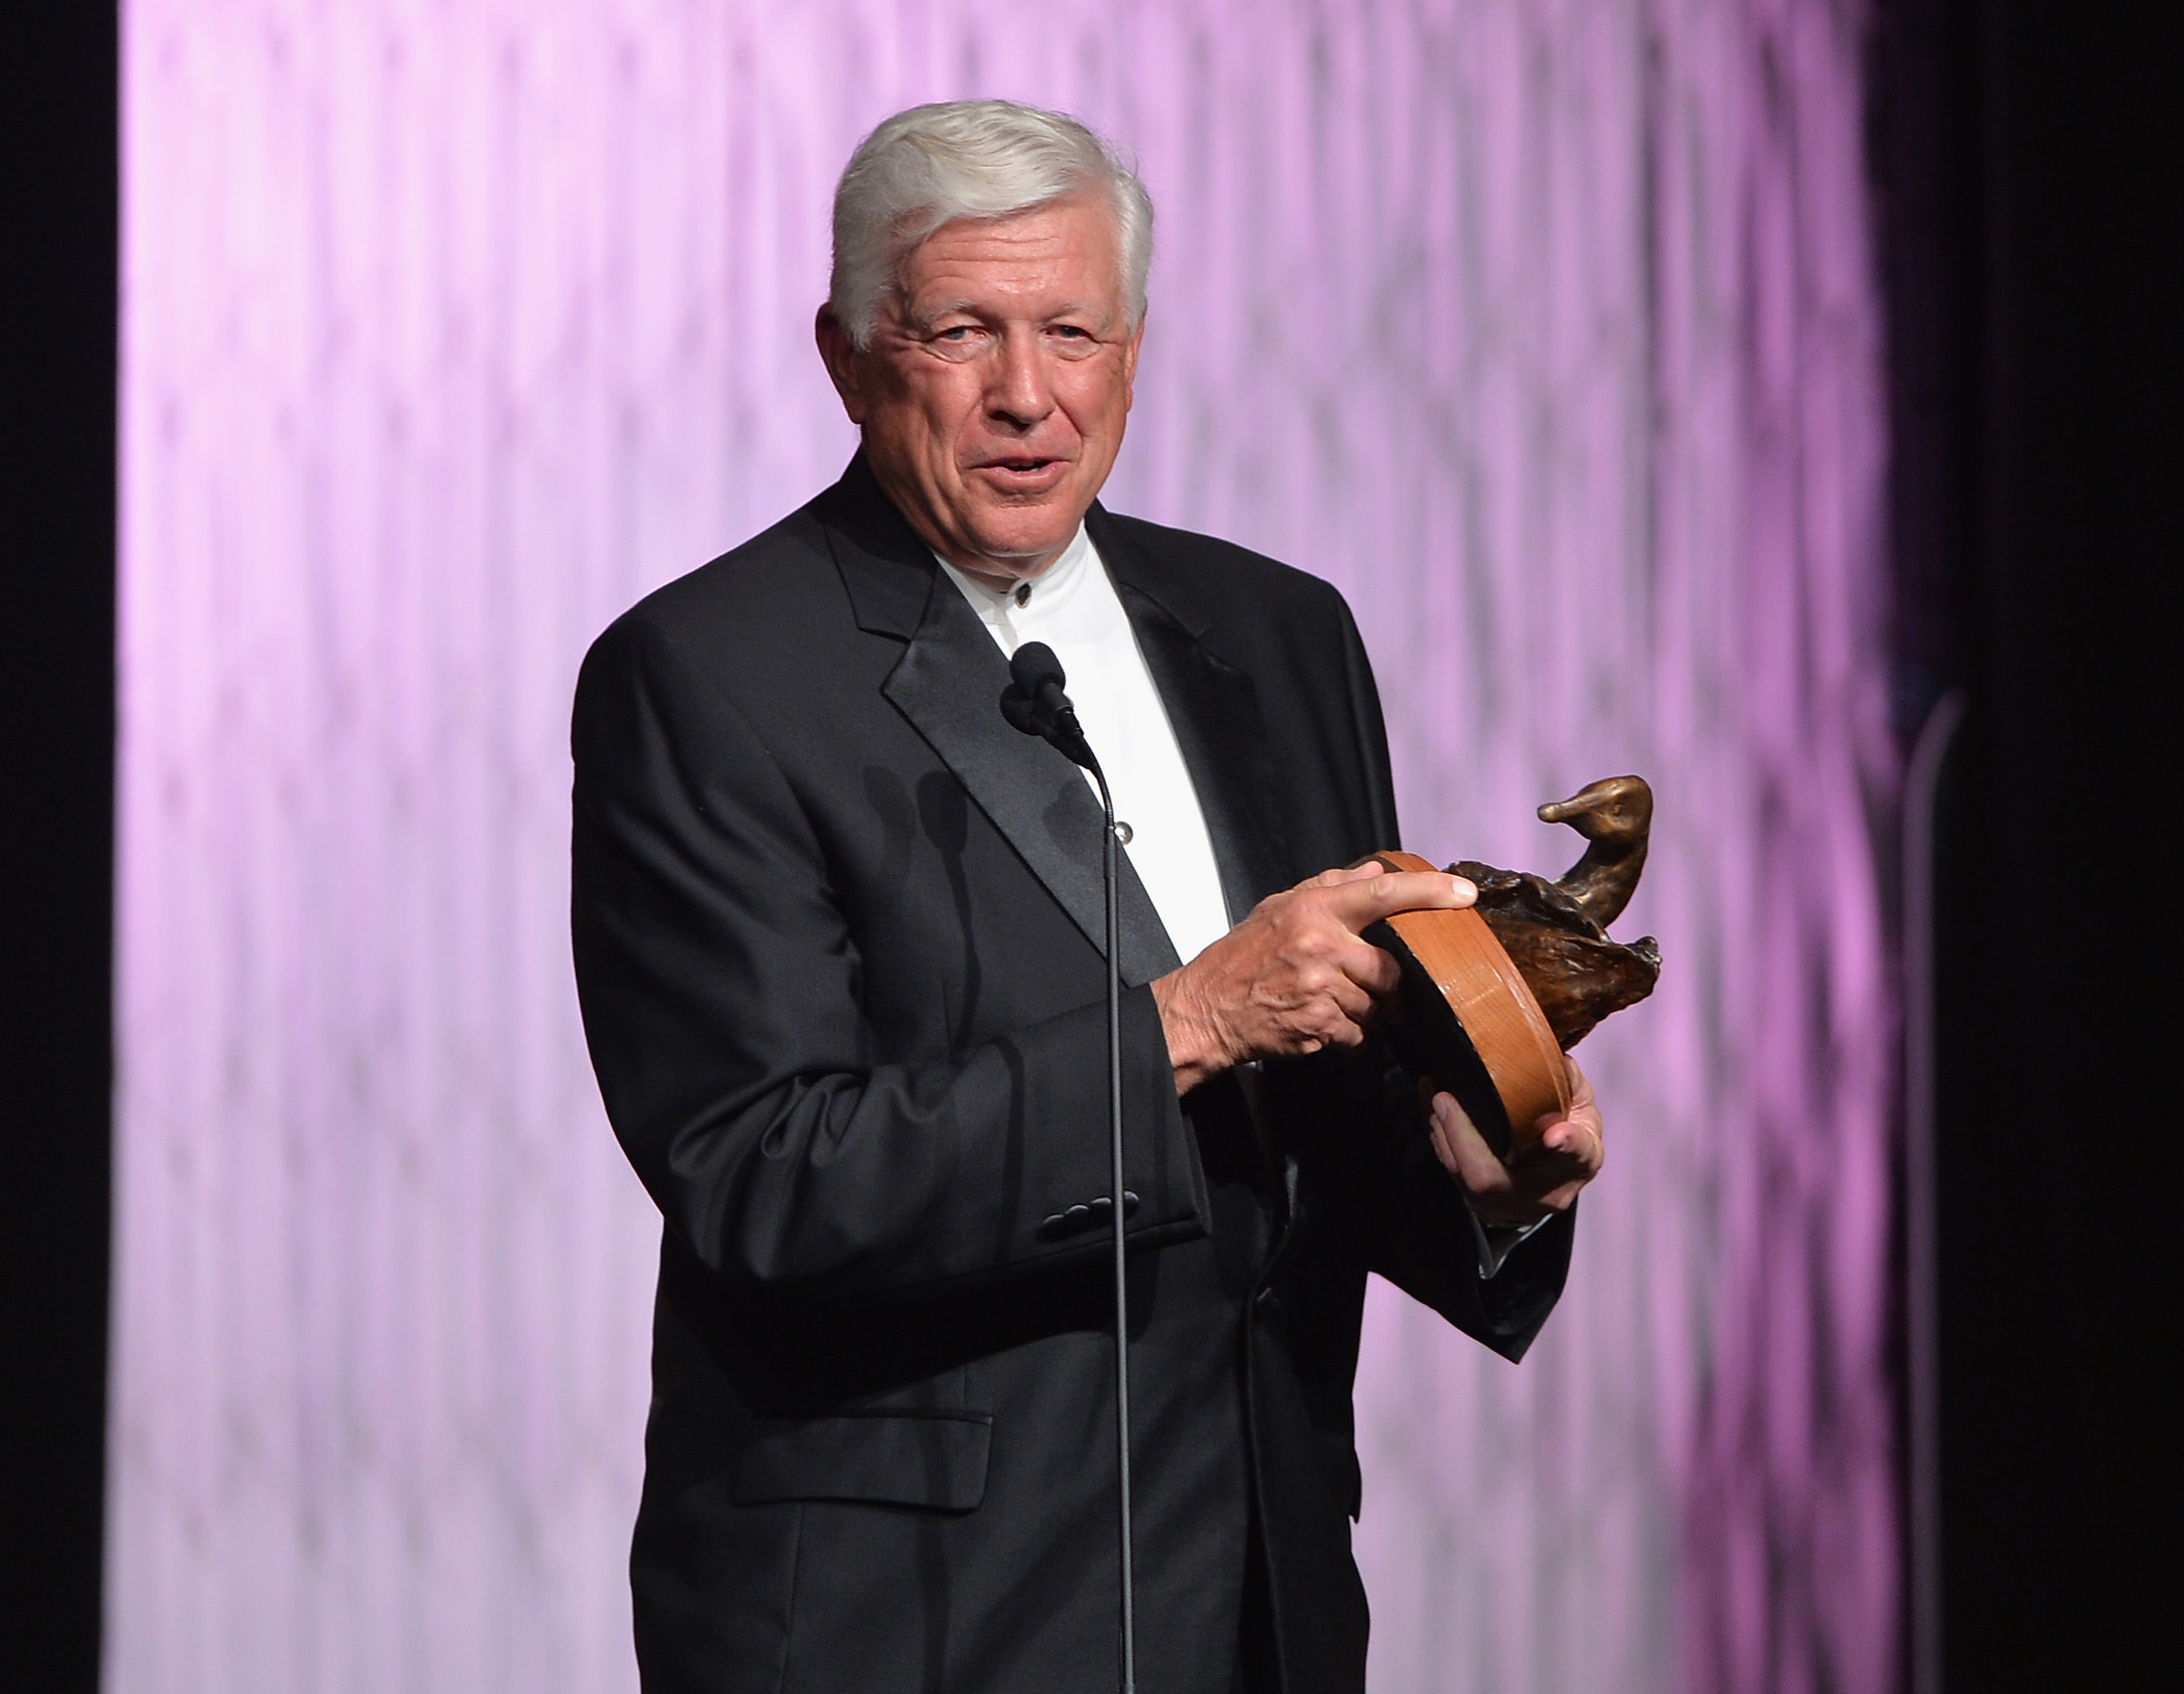 Philanthropist Foster Friess speaks on stage at the 22nd Annual Movieguide Awards Gala at the Universal Hilton Hotel in 2014 in Universal City, California. (Alberto E. Rodriguez/Getty Images)